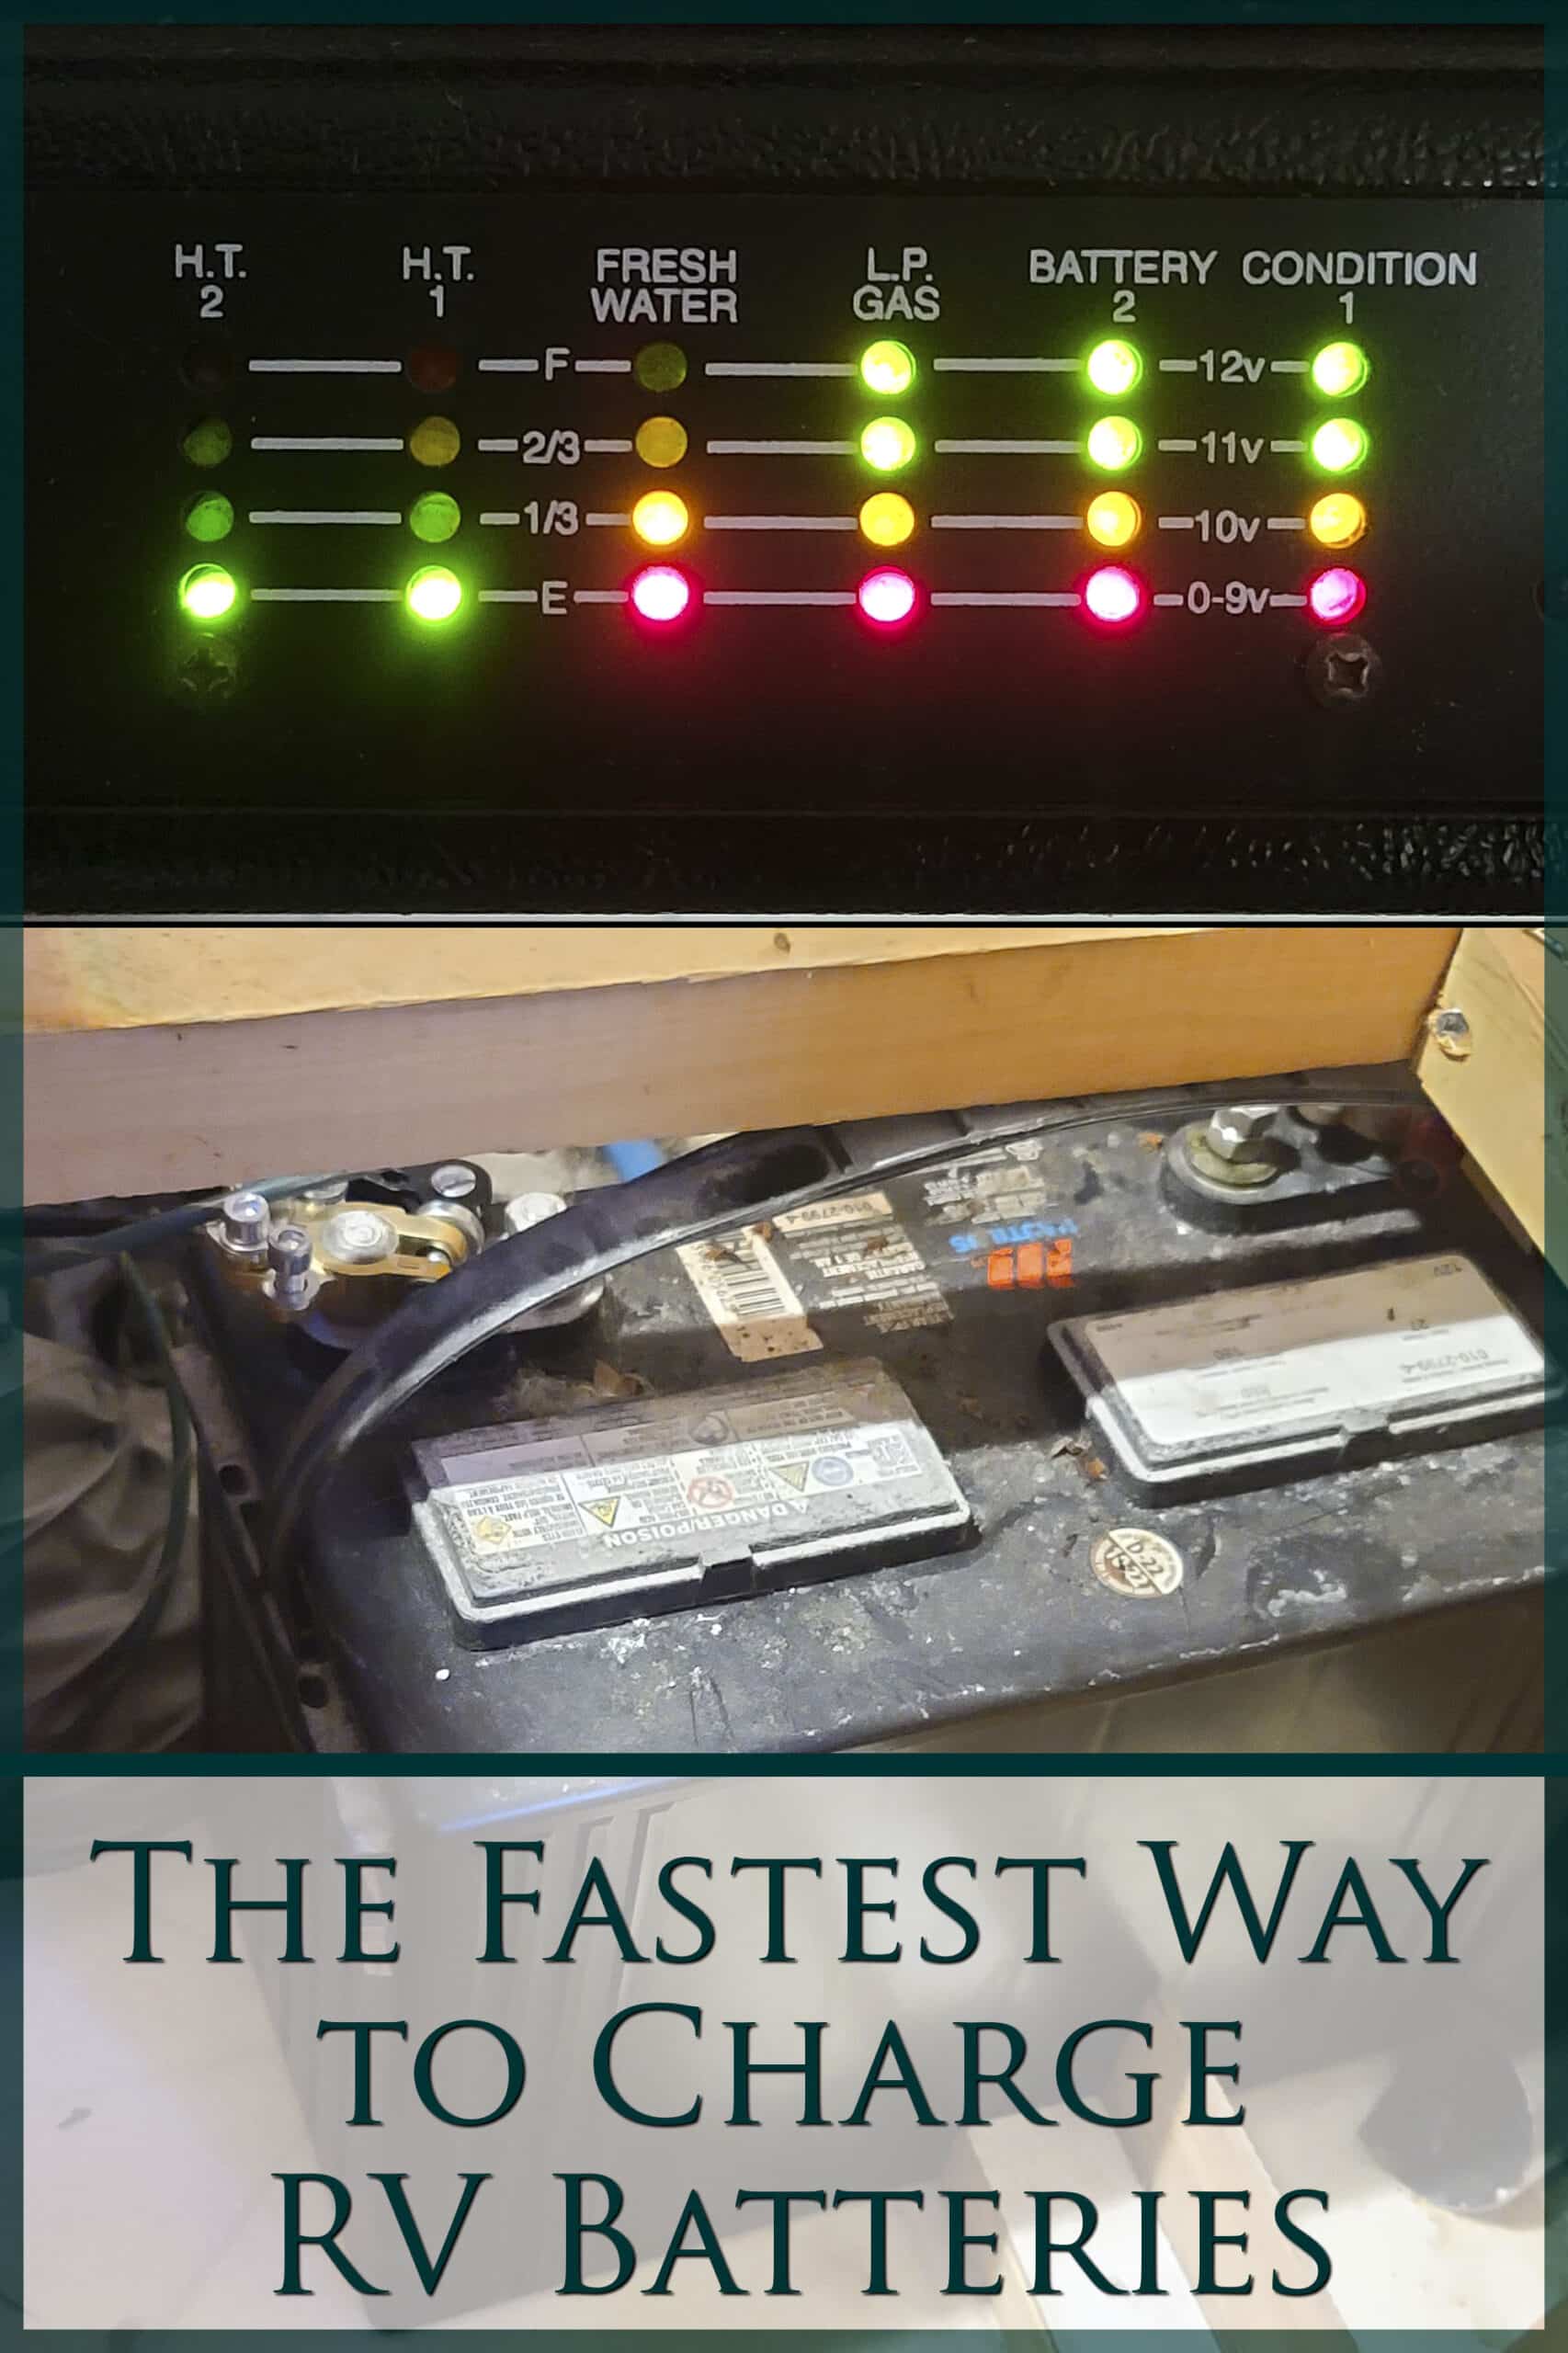 At the top is a picture of the RV status indicators including battery level.  At the bottom is a picture of a deep cycle 12v battery.  Text overlaid at the bottom reads The Fastest Way to Charge RV Batteries